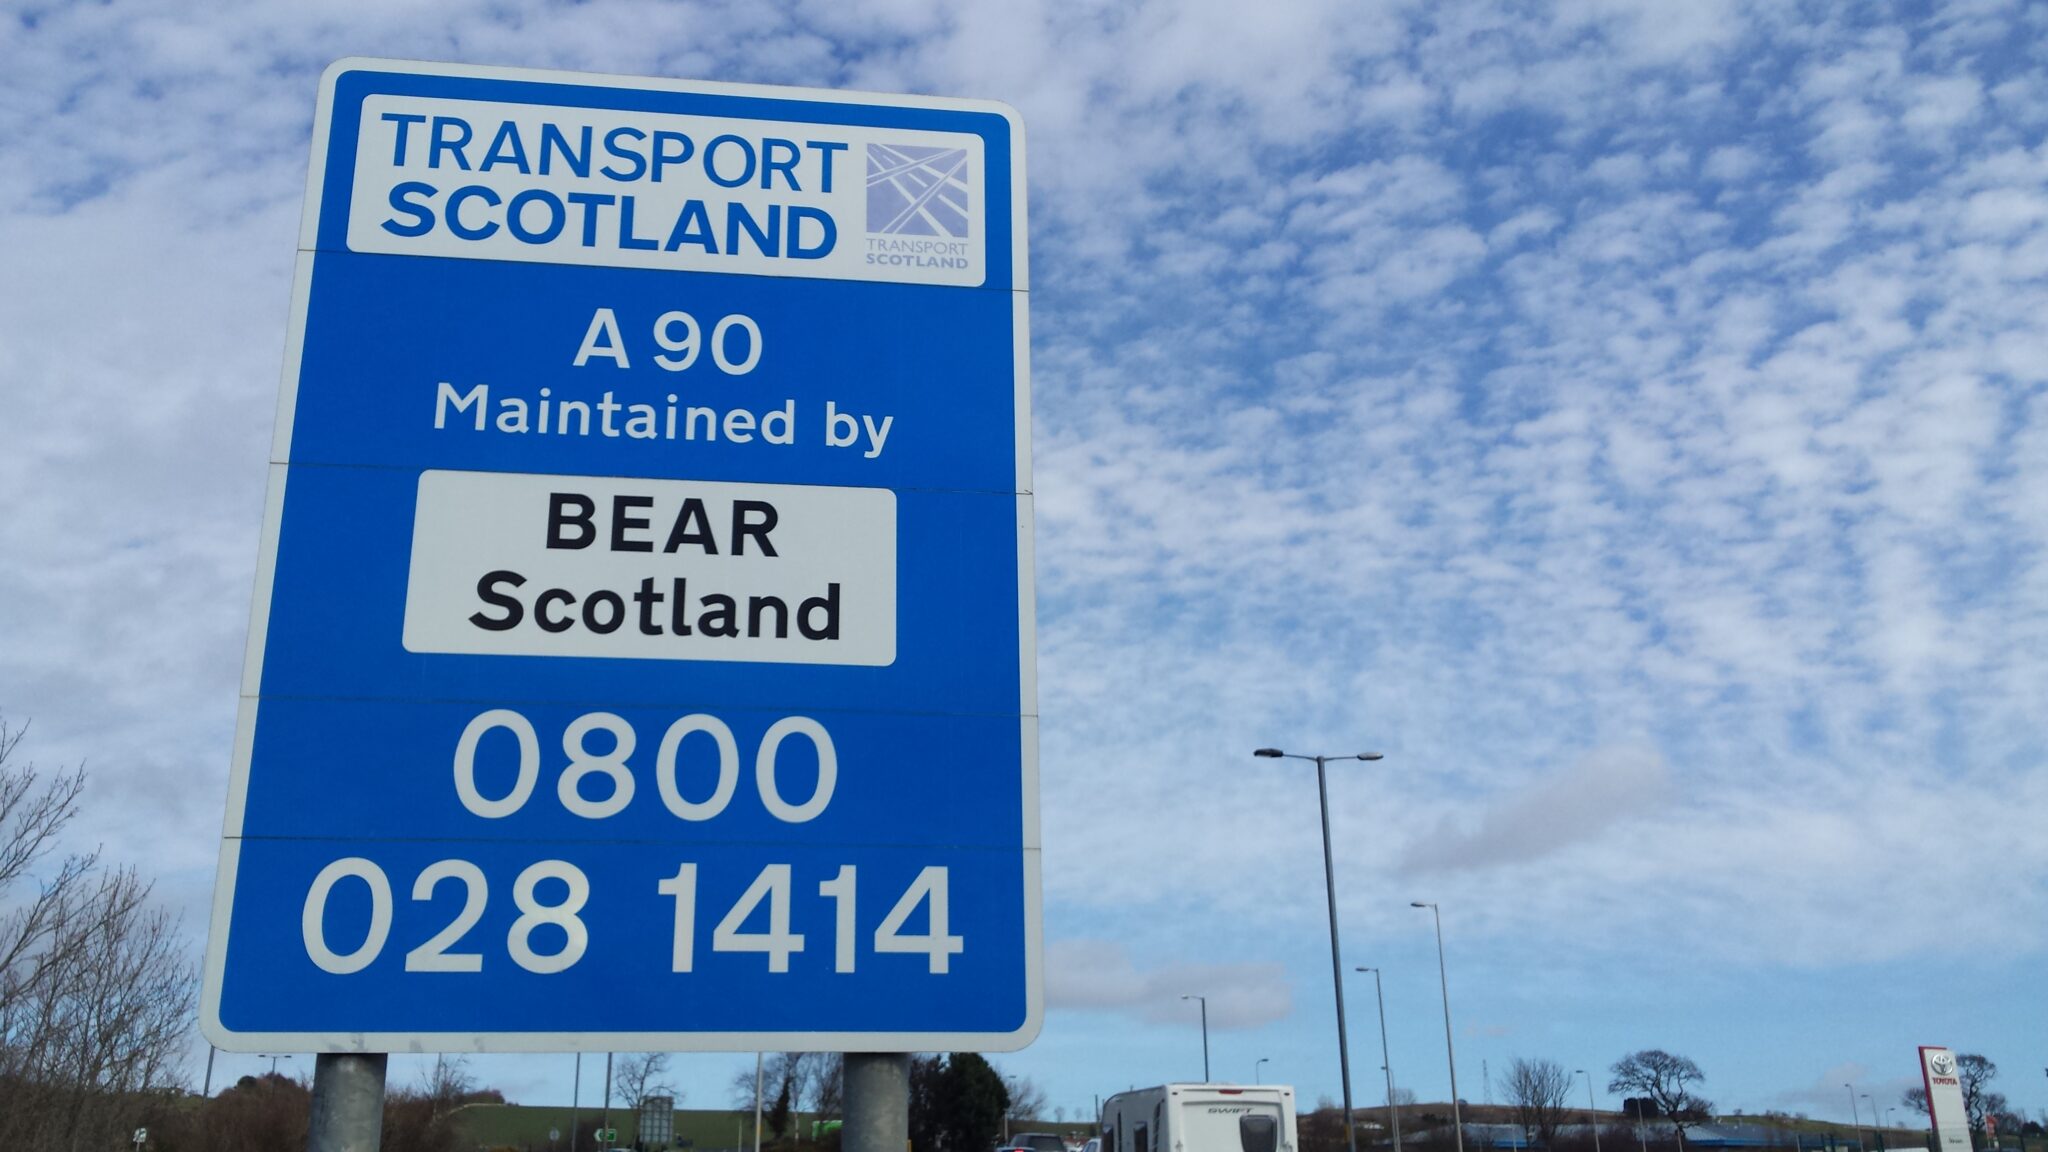 £650,000 SURFACING IMPROVEMENTS PLANNED FOR THE A90 GLAMIS JUNCTION